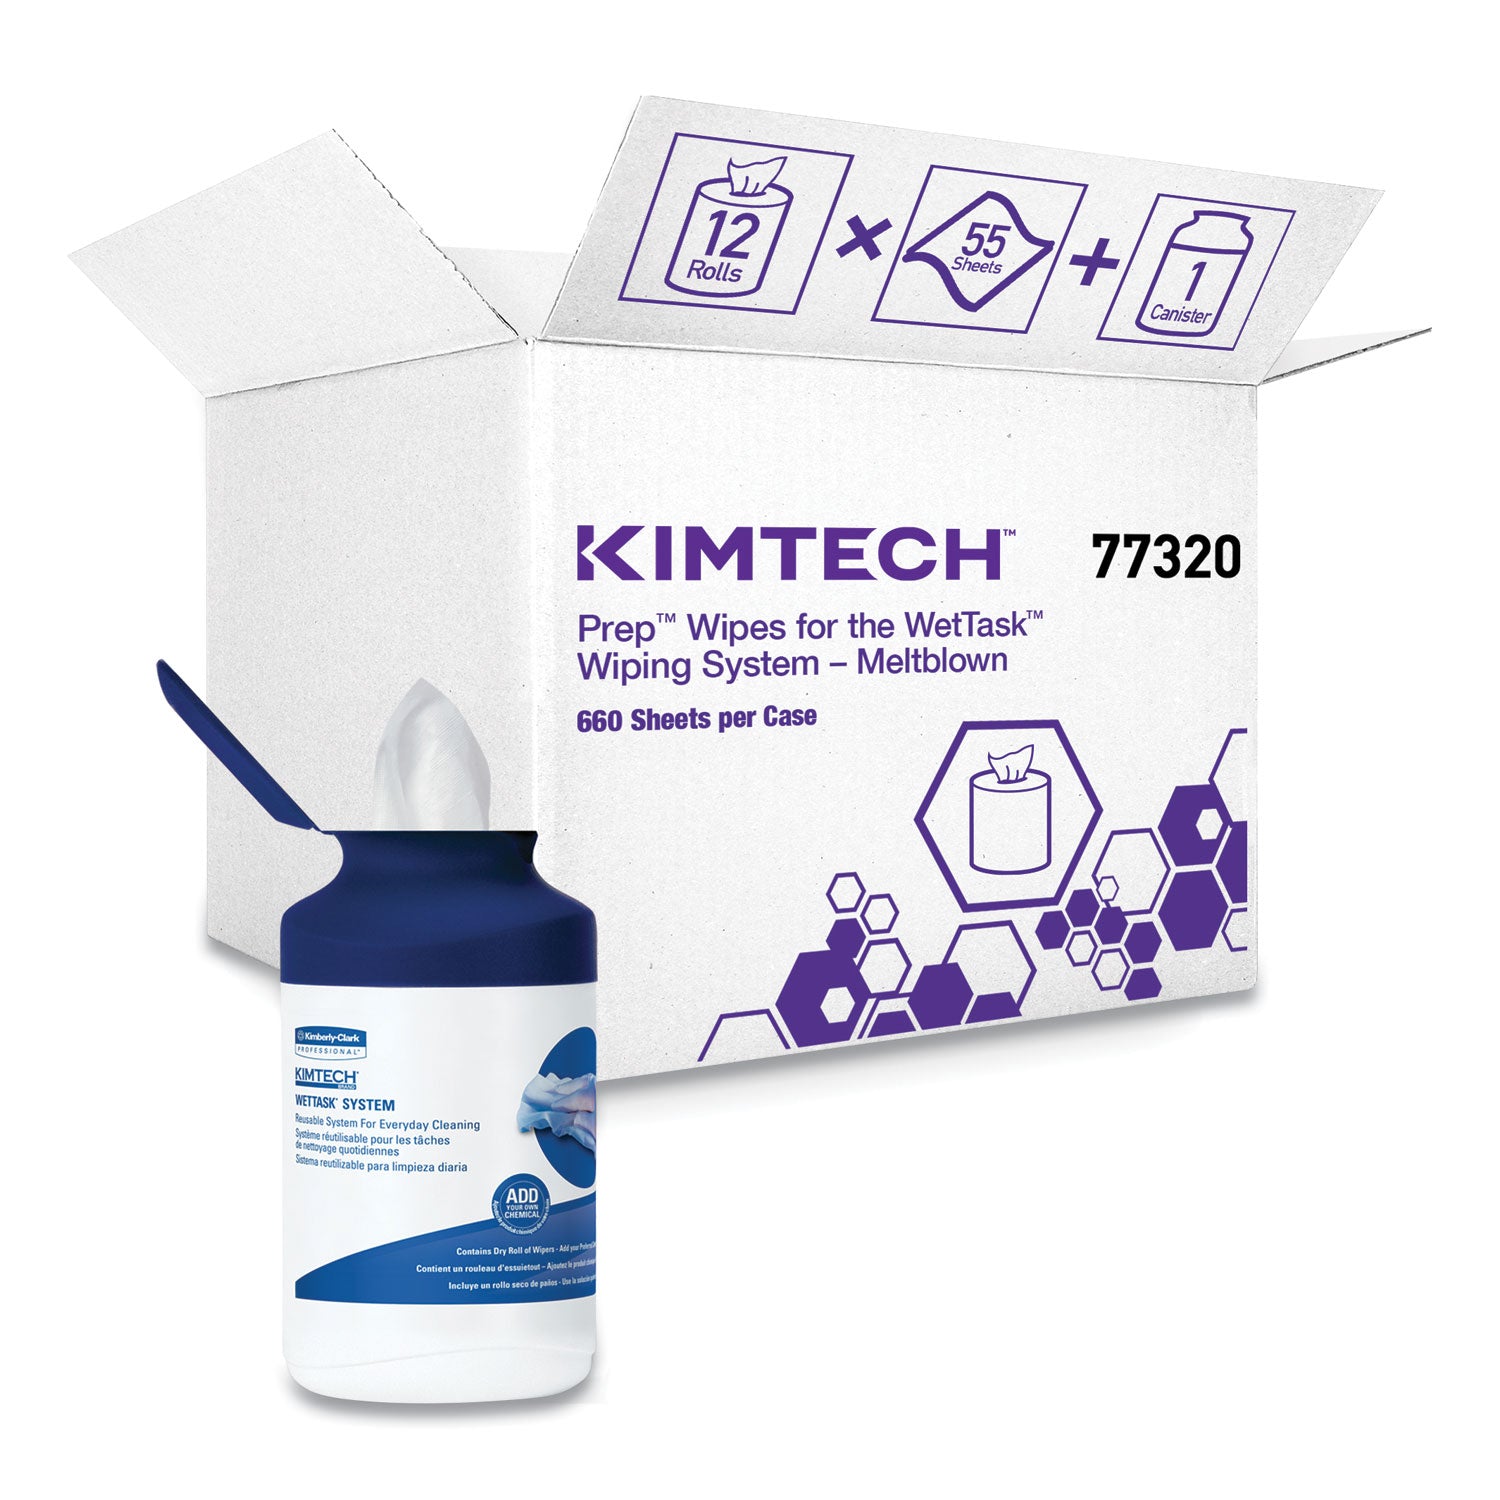 wettask-system-prep-wipers-for-bleach-disinfectants-sanitizers-hygienic-enclosed-system-refills-w-canister-55-rl12-roll-ct_kcc7732005 - 1